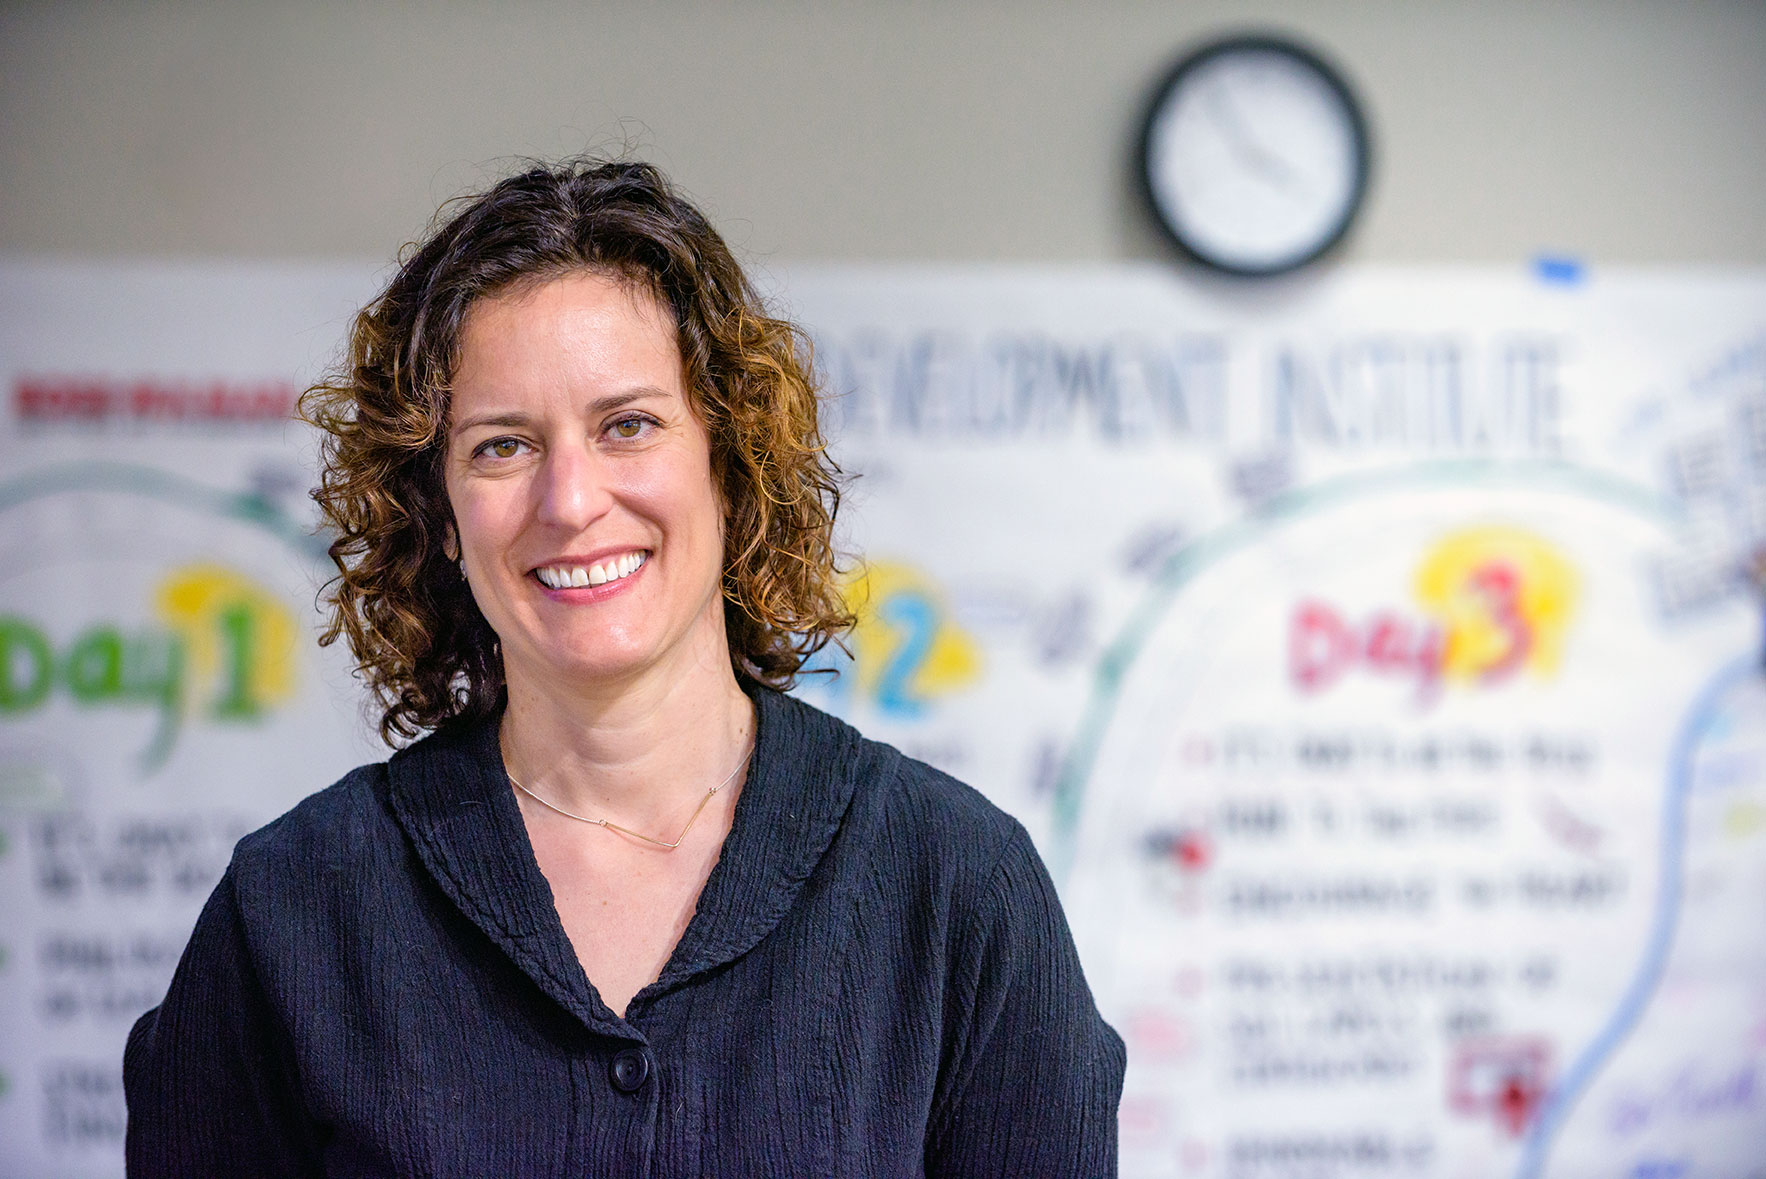 Julia Reich does a Graphic Recording in Indiana at Rose-Hulman Institute of Technology